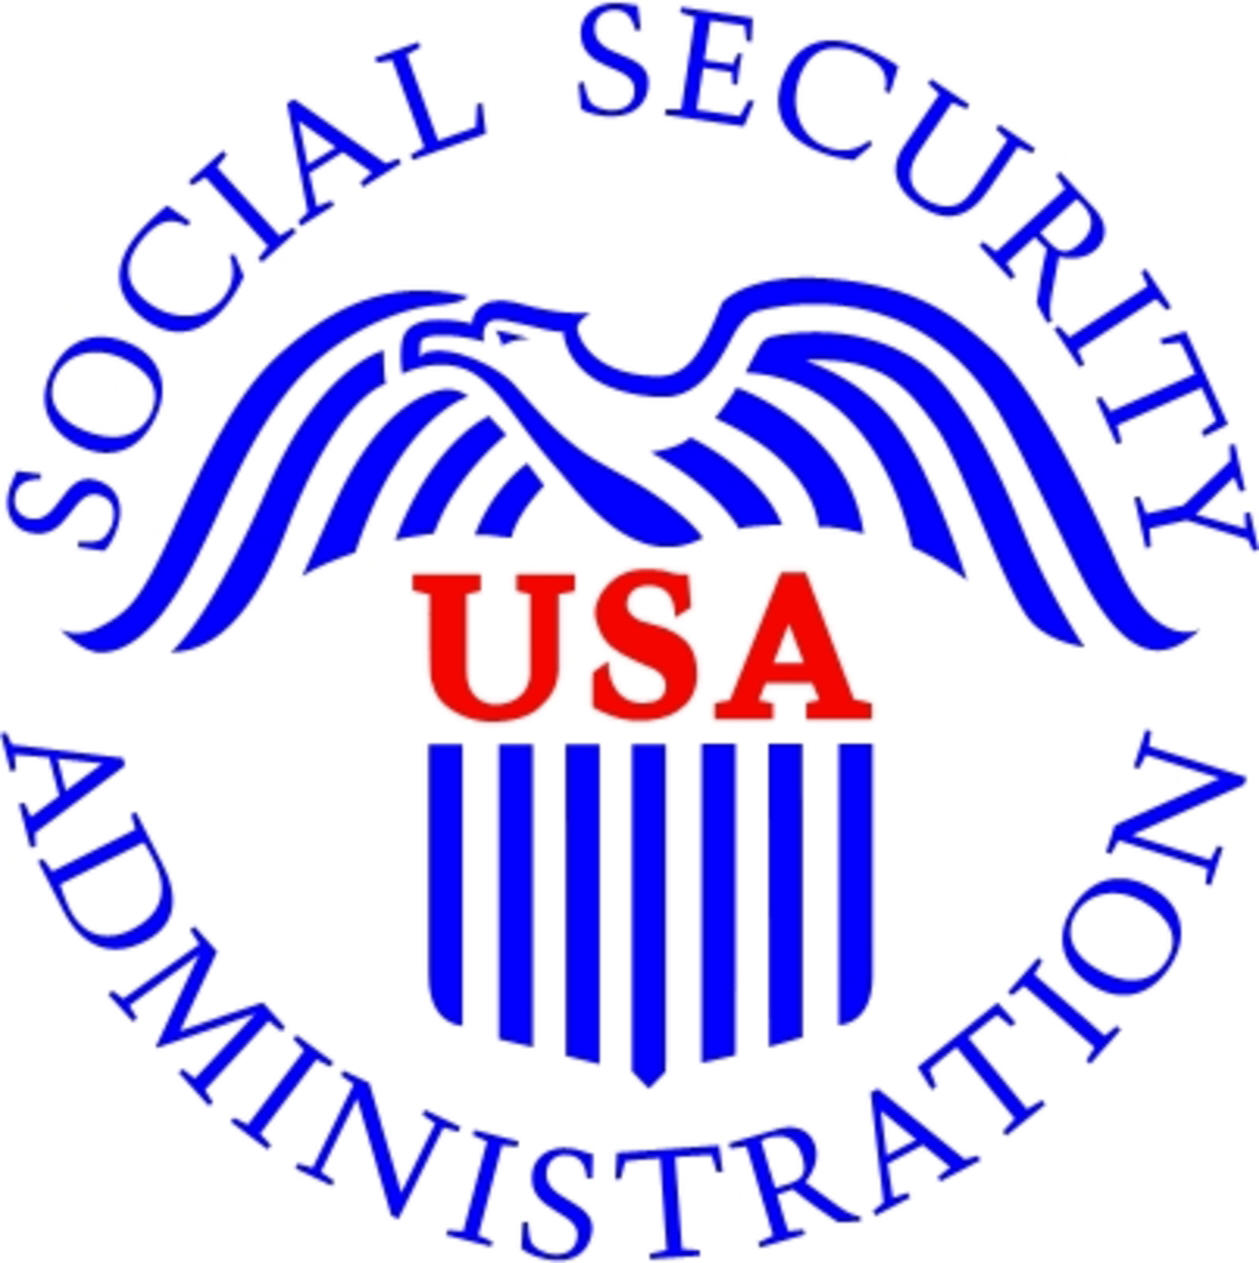 Social Security Office – Palm Springs